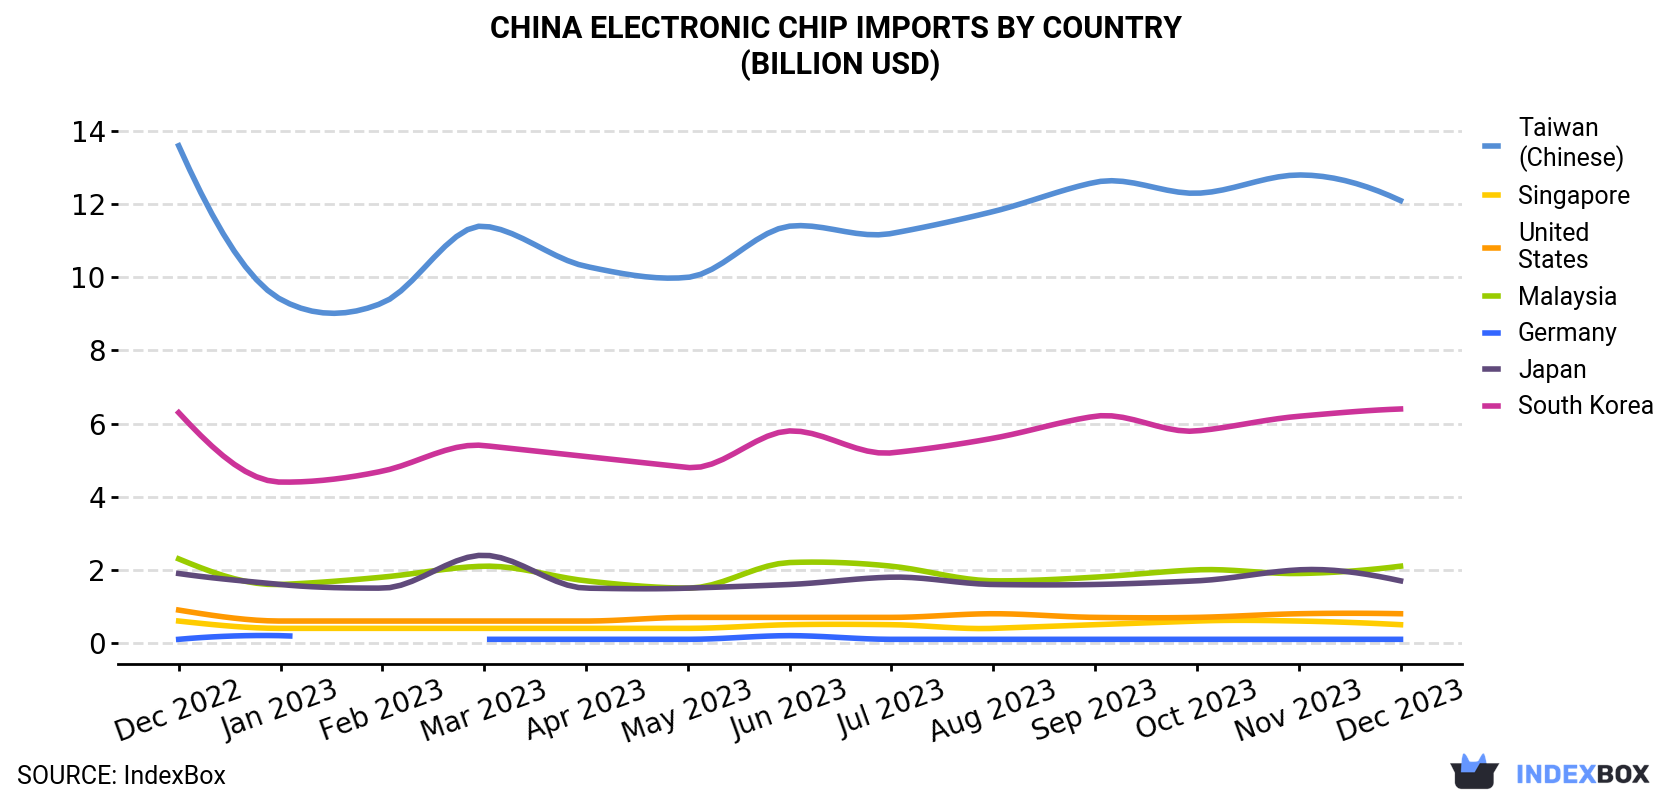 China Electronic Chip Imports By Country (Billion USD)